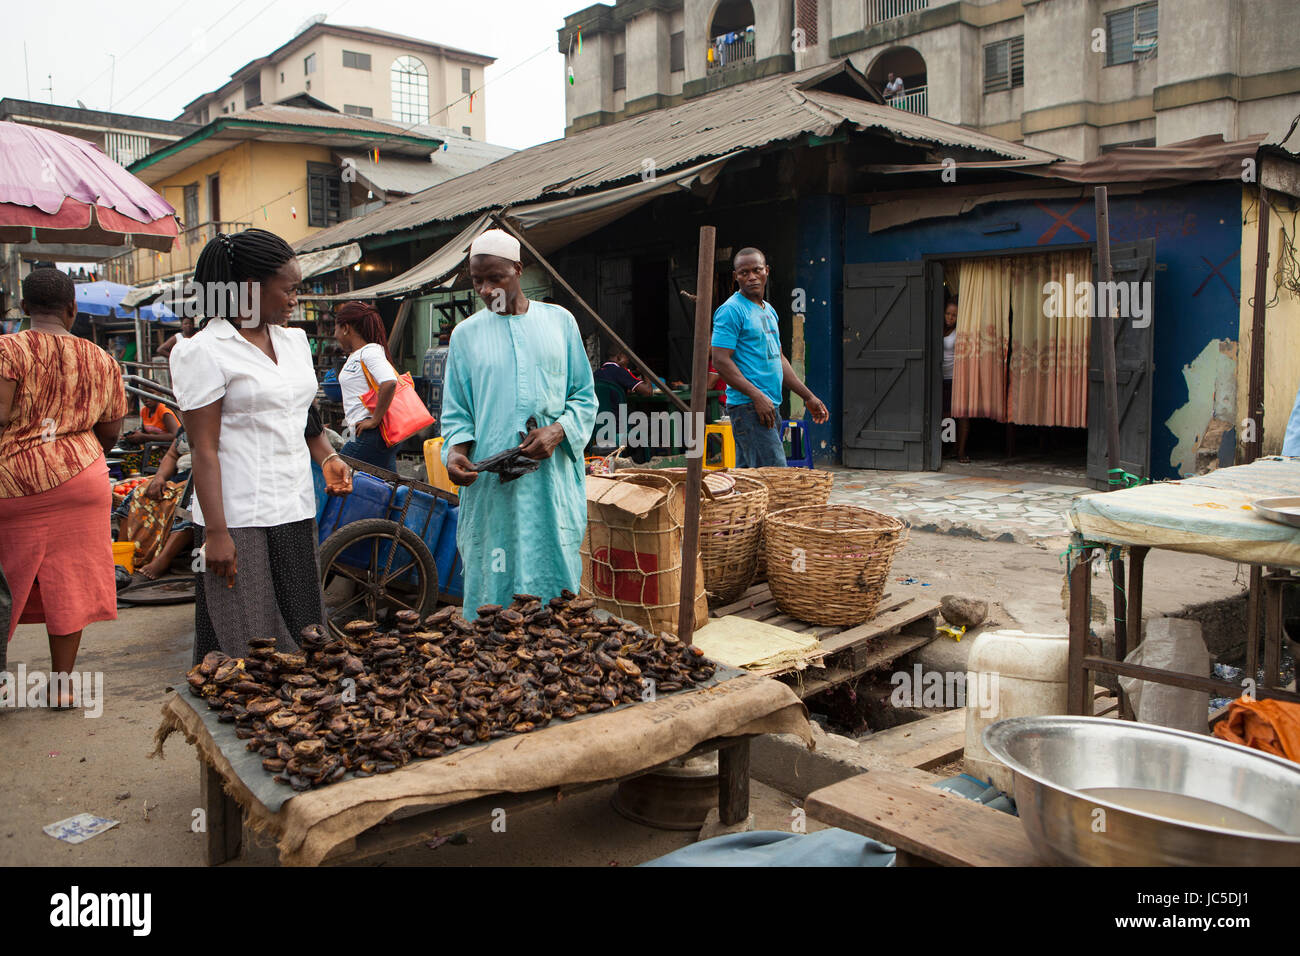 A woman selling dried food on a roadside stall, Nigeria, Africa Stock Photo